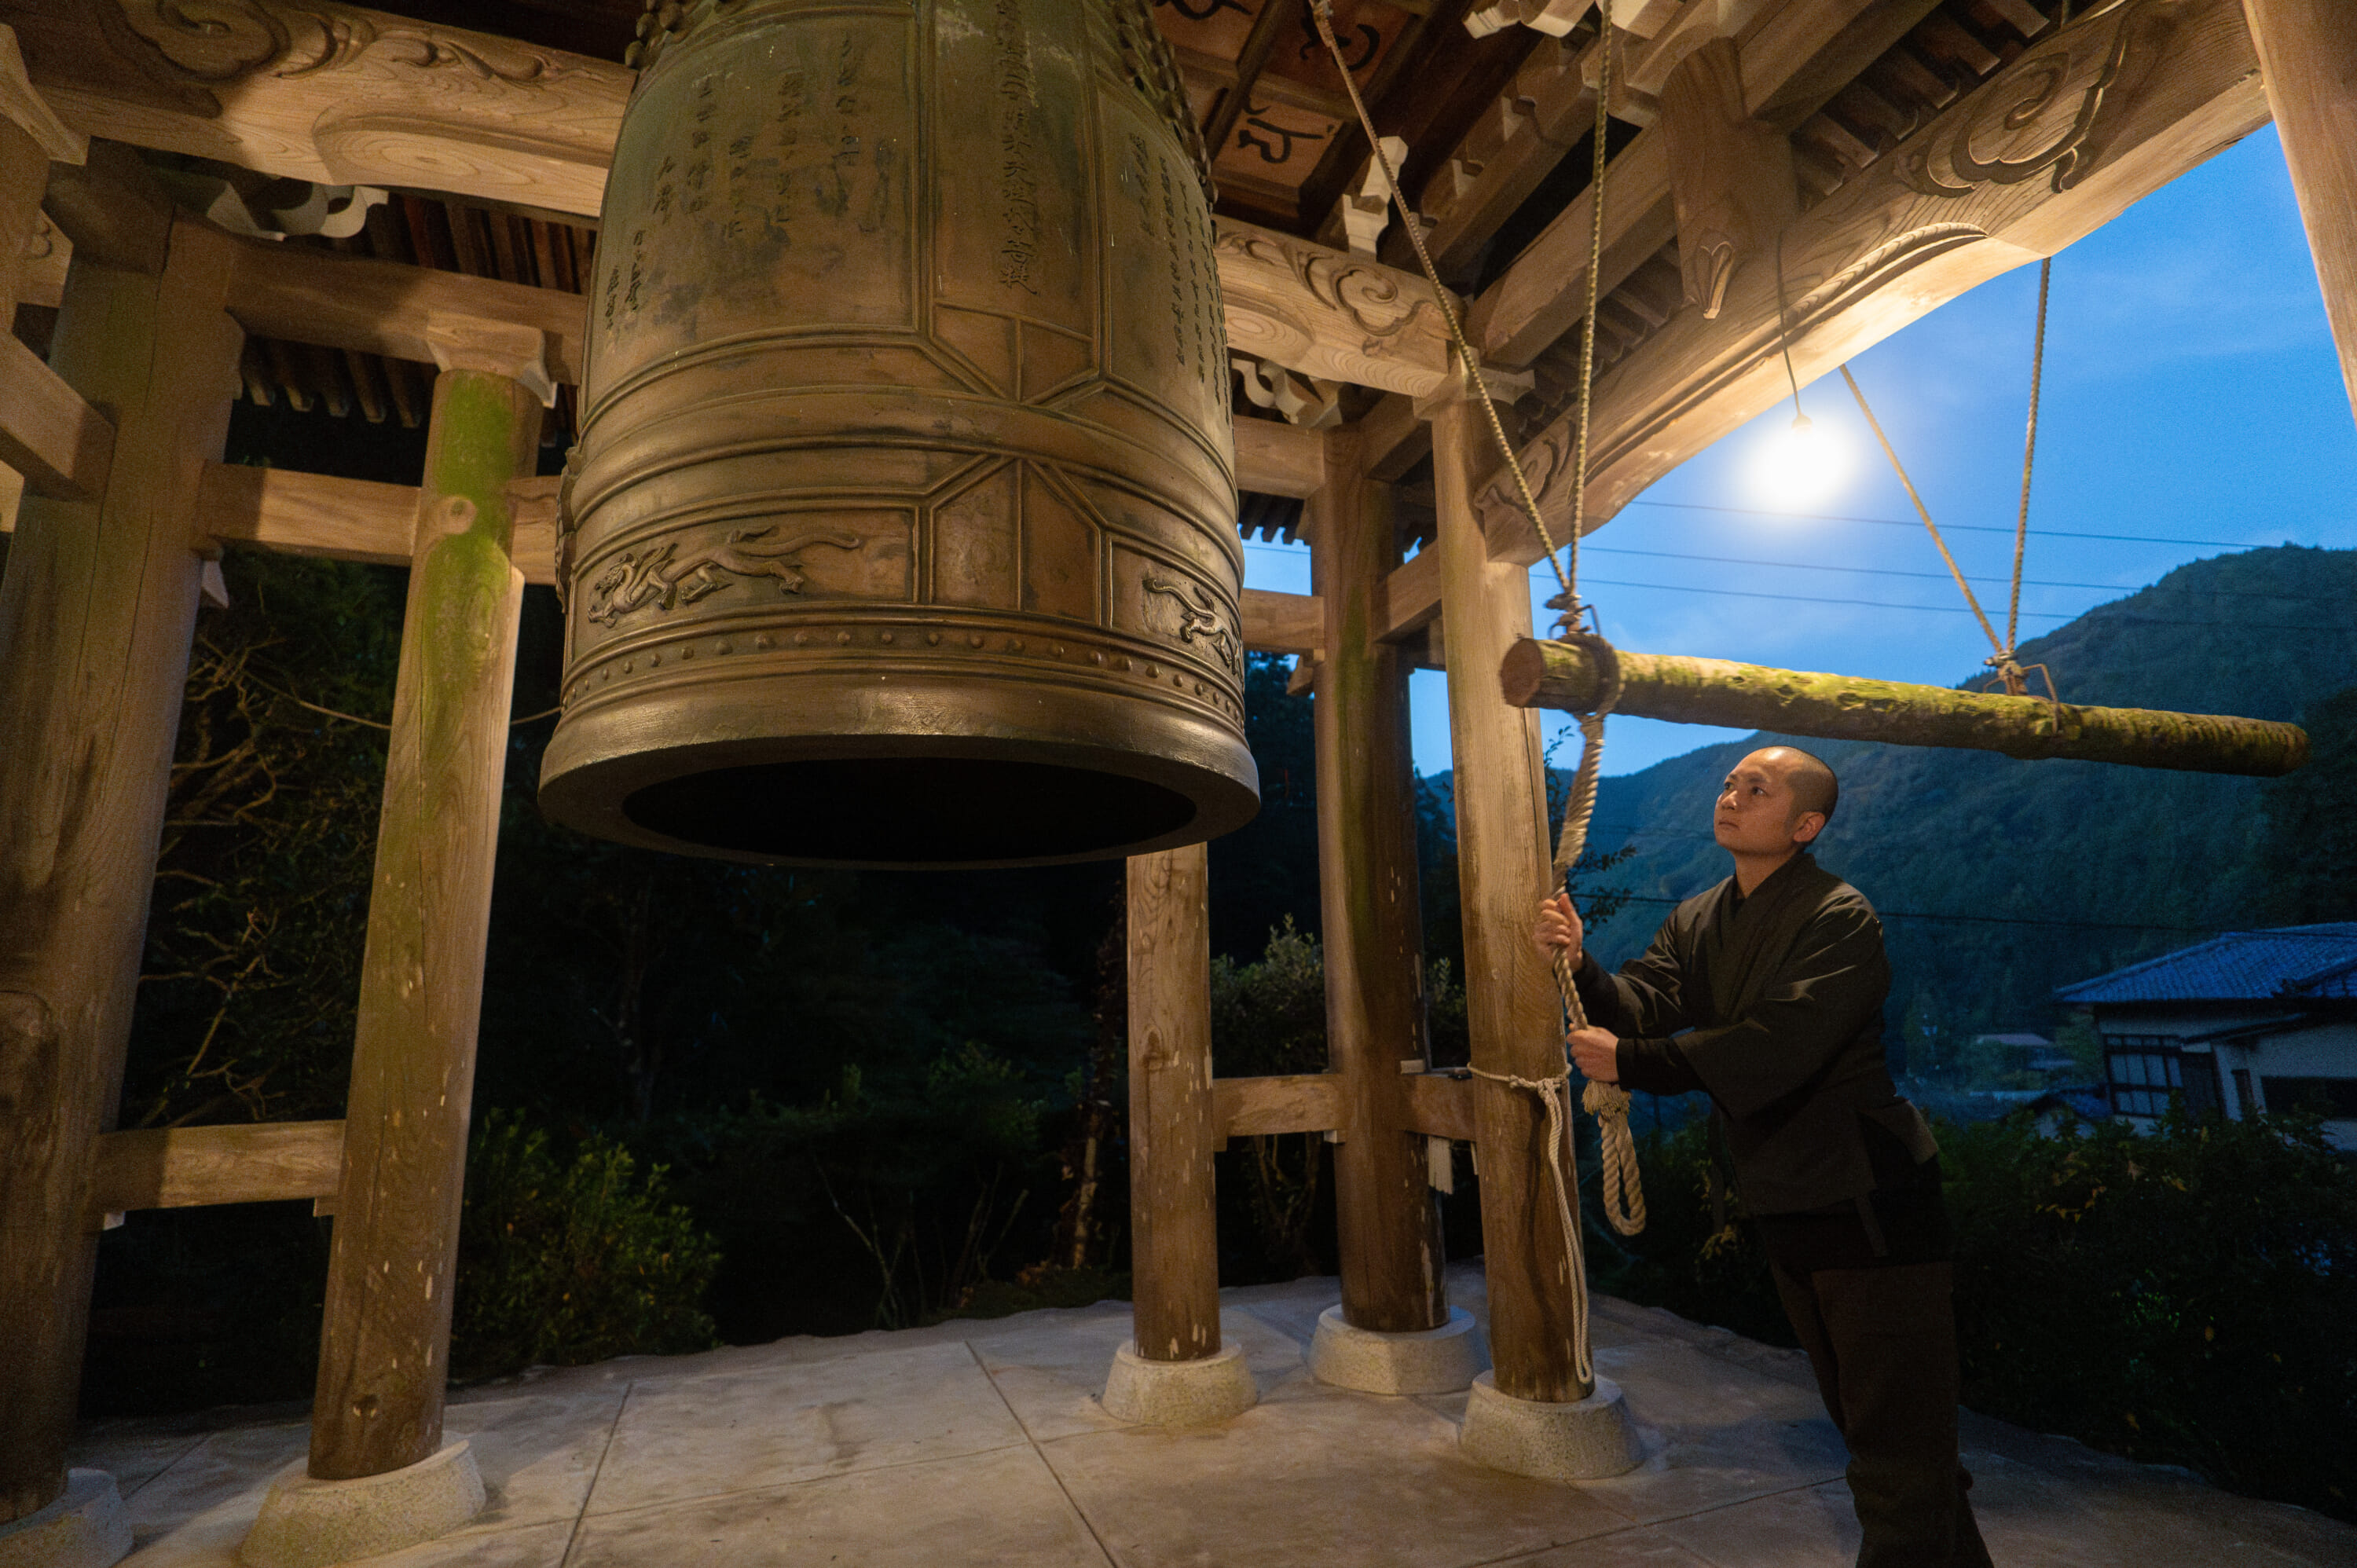 Temple Ring Bell: Scientific Reason Behind The Temple Bell